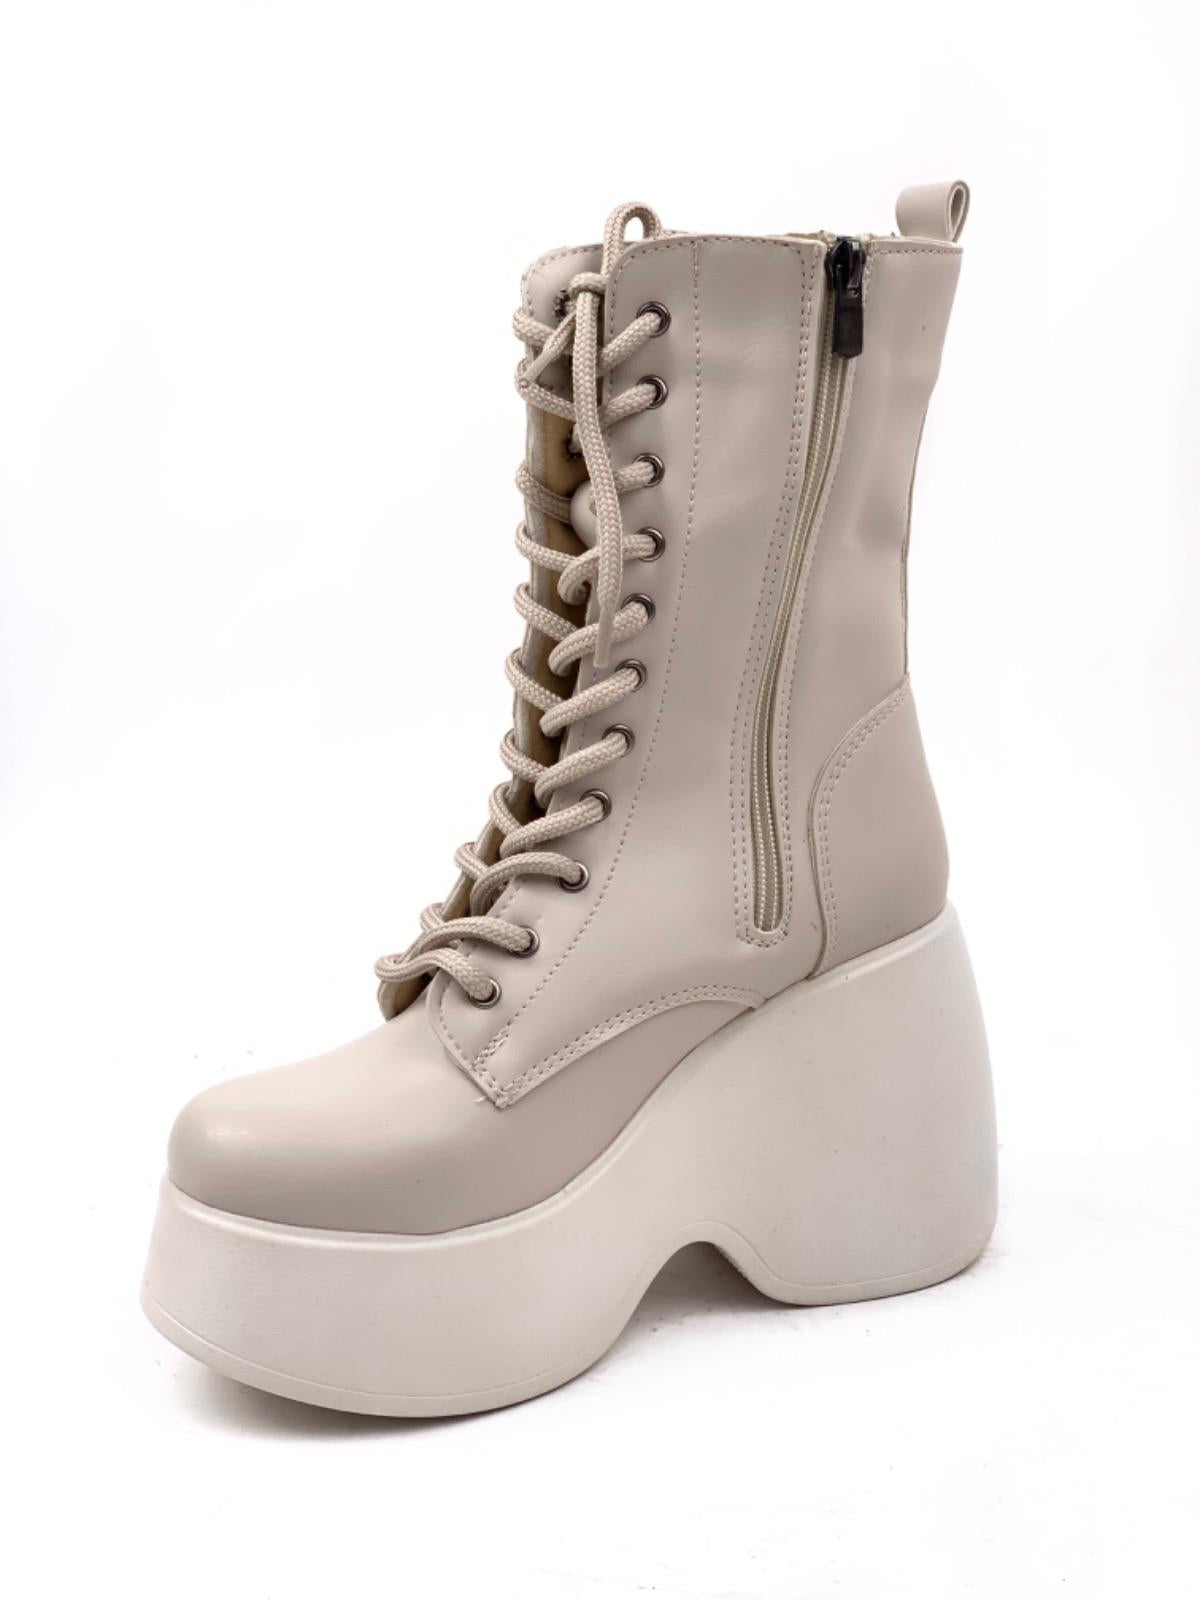 Women's Beige Karr Skin Faux Leather Padding High Sole Boots - STREETMODE ™